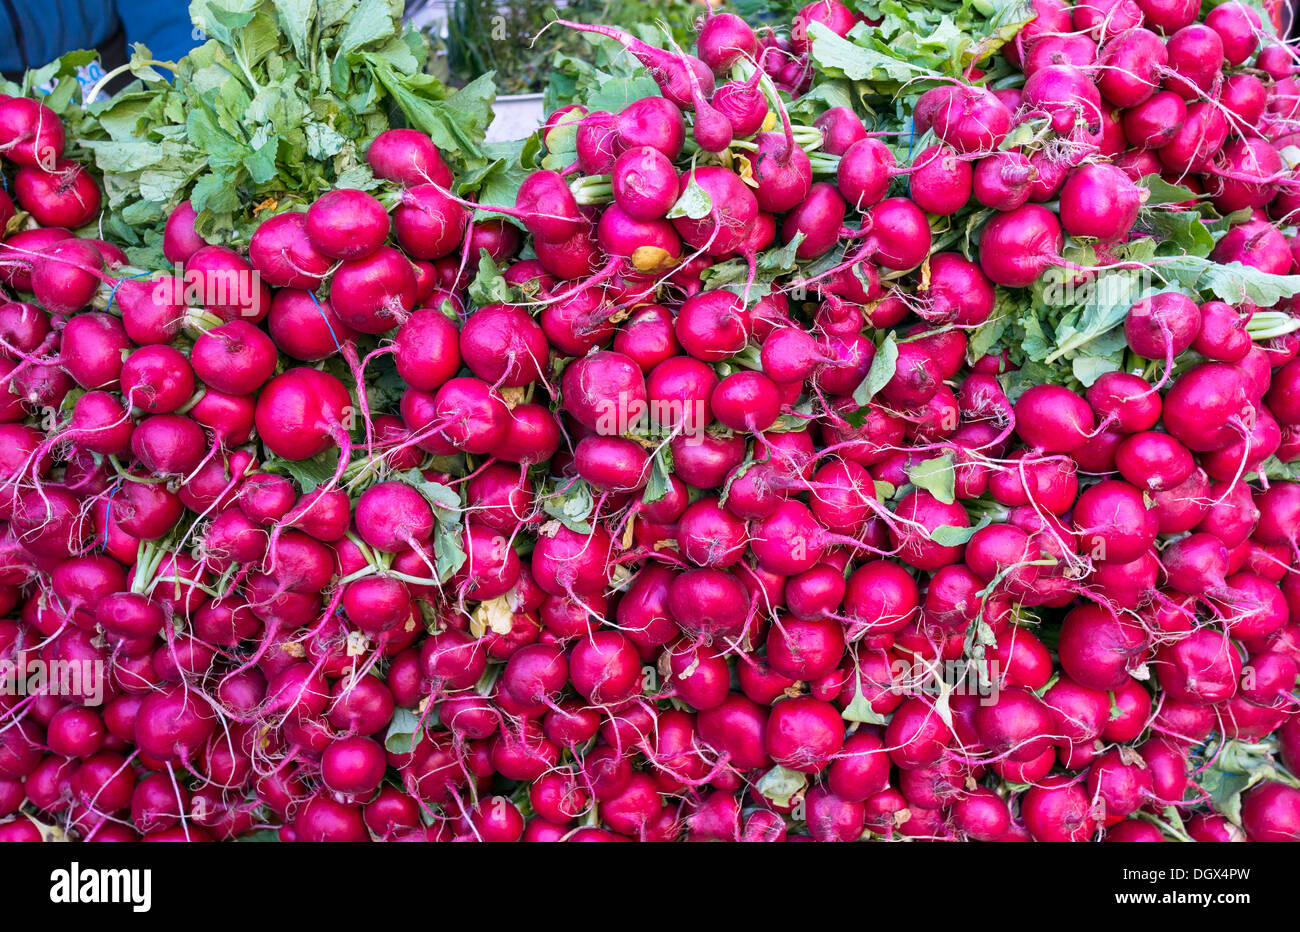 radishes in a farmers market Stock Photo